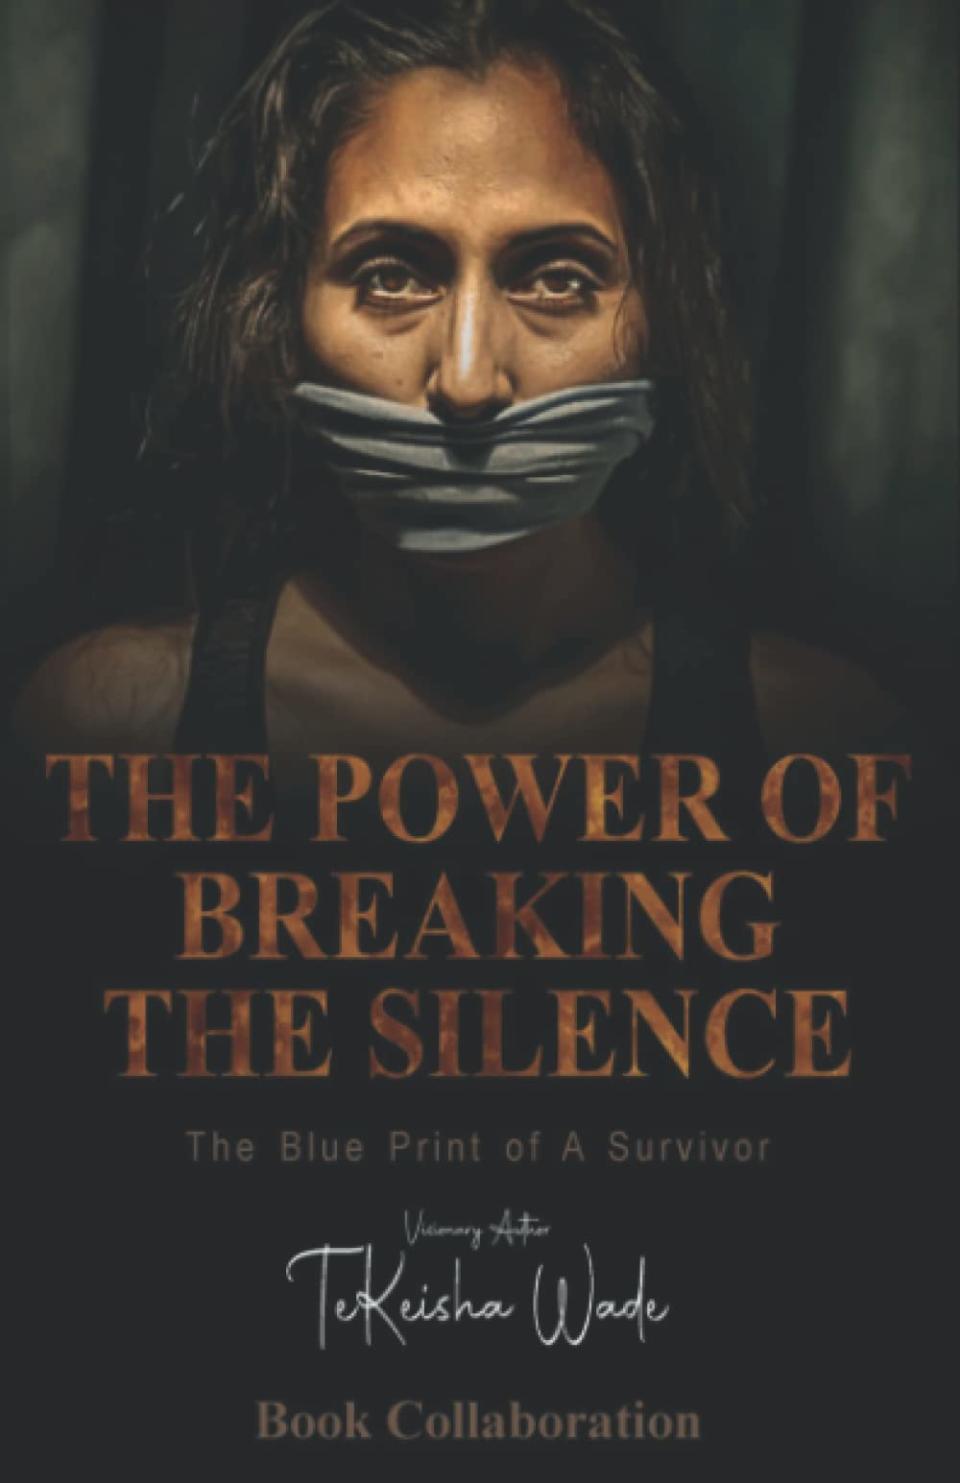 Doris Taylor will be signing copies of "The Power of Breaking the Silence: The Blue Print of a Survivor" from 4 to 8 p.m. Saturday at the Cricket Club, 36 W. Michigan Ave.